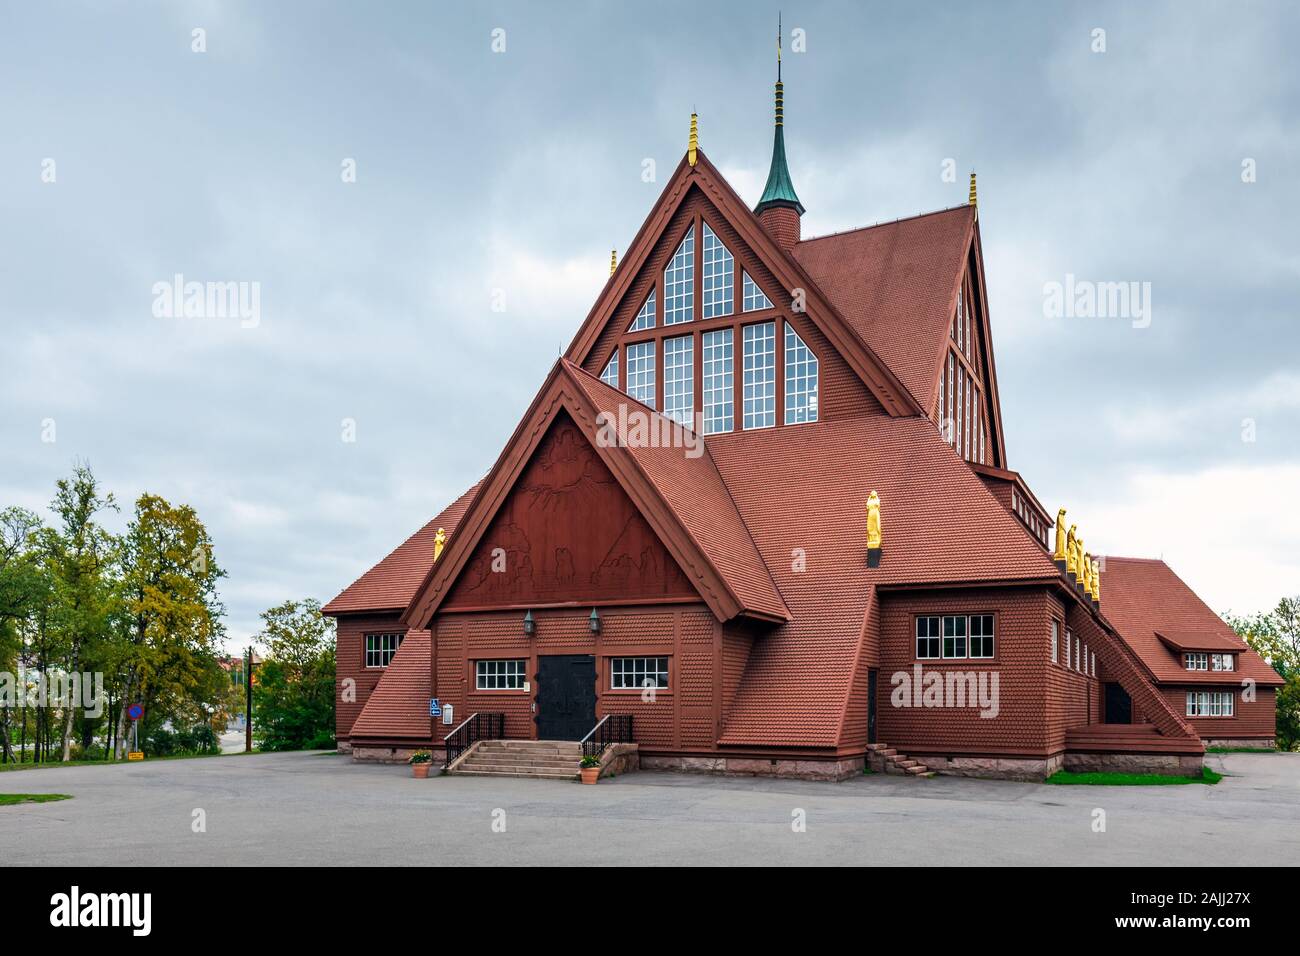 The church of Kiruna, Sweden. Built in Gothic Revival style at the beginning of the XIX century, it is one of the largest wooden building. Kiruna, Swe Stock Photo